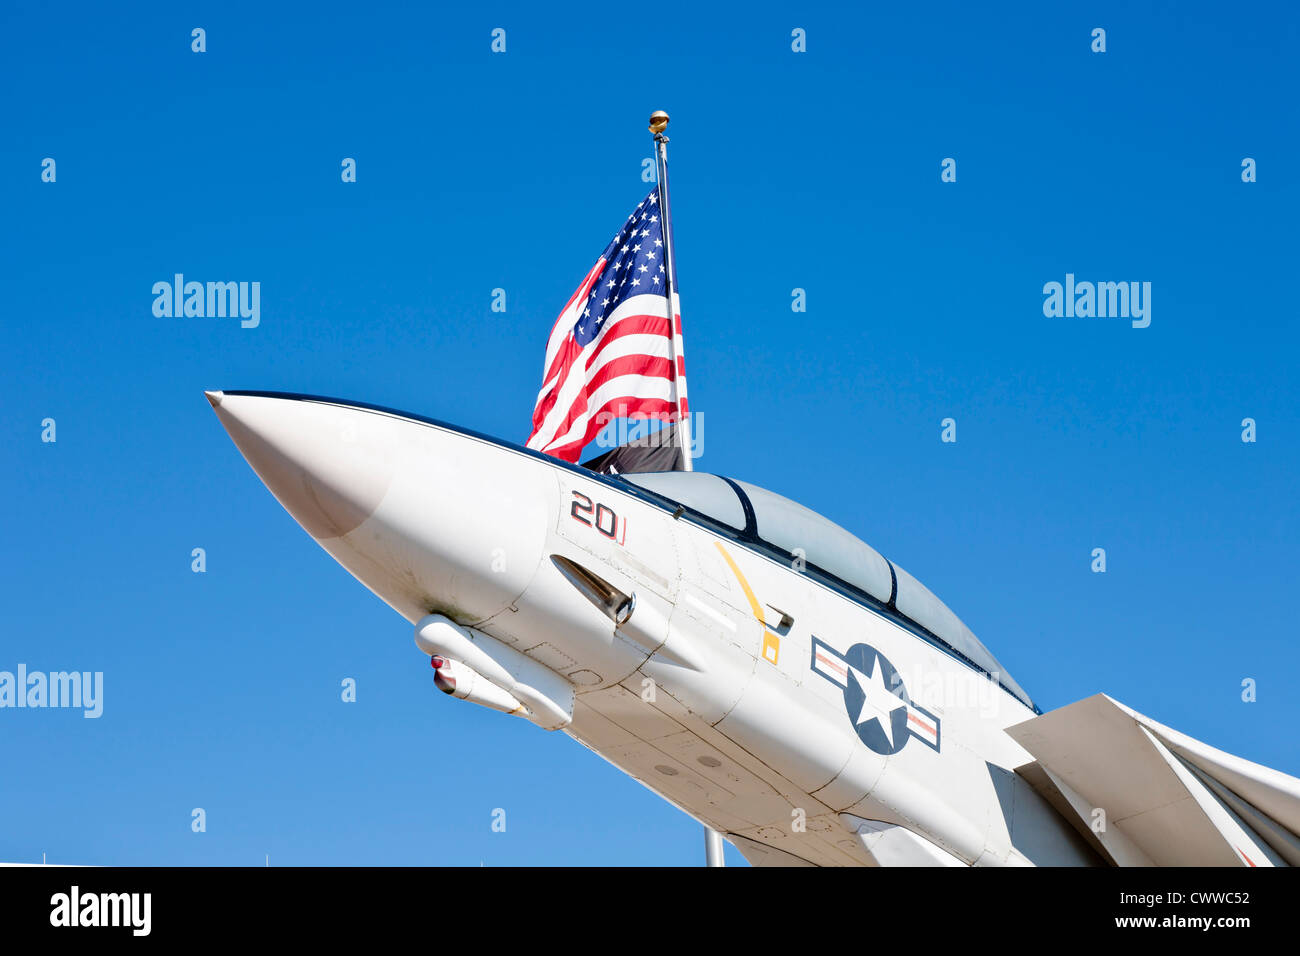 F-14A Tomcat fighter jet in front of the National Museum of Naval Aviation in Pensacola, FL Stock Photo